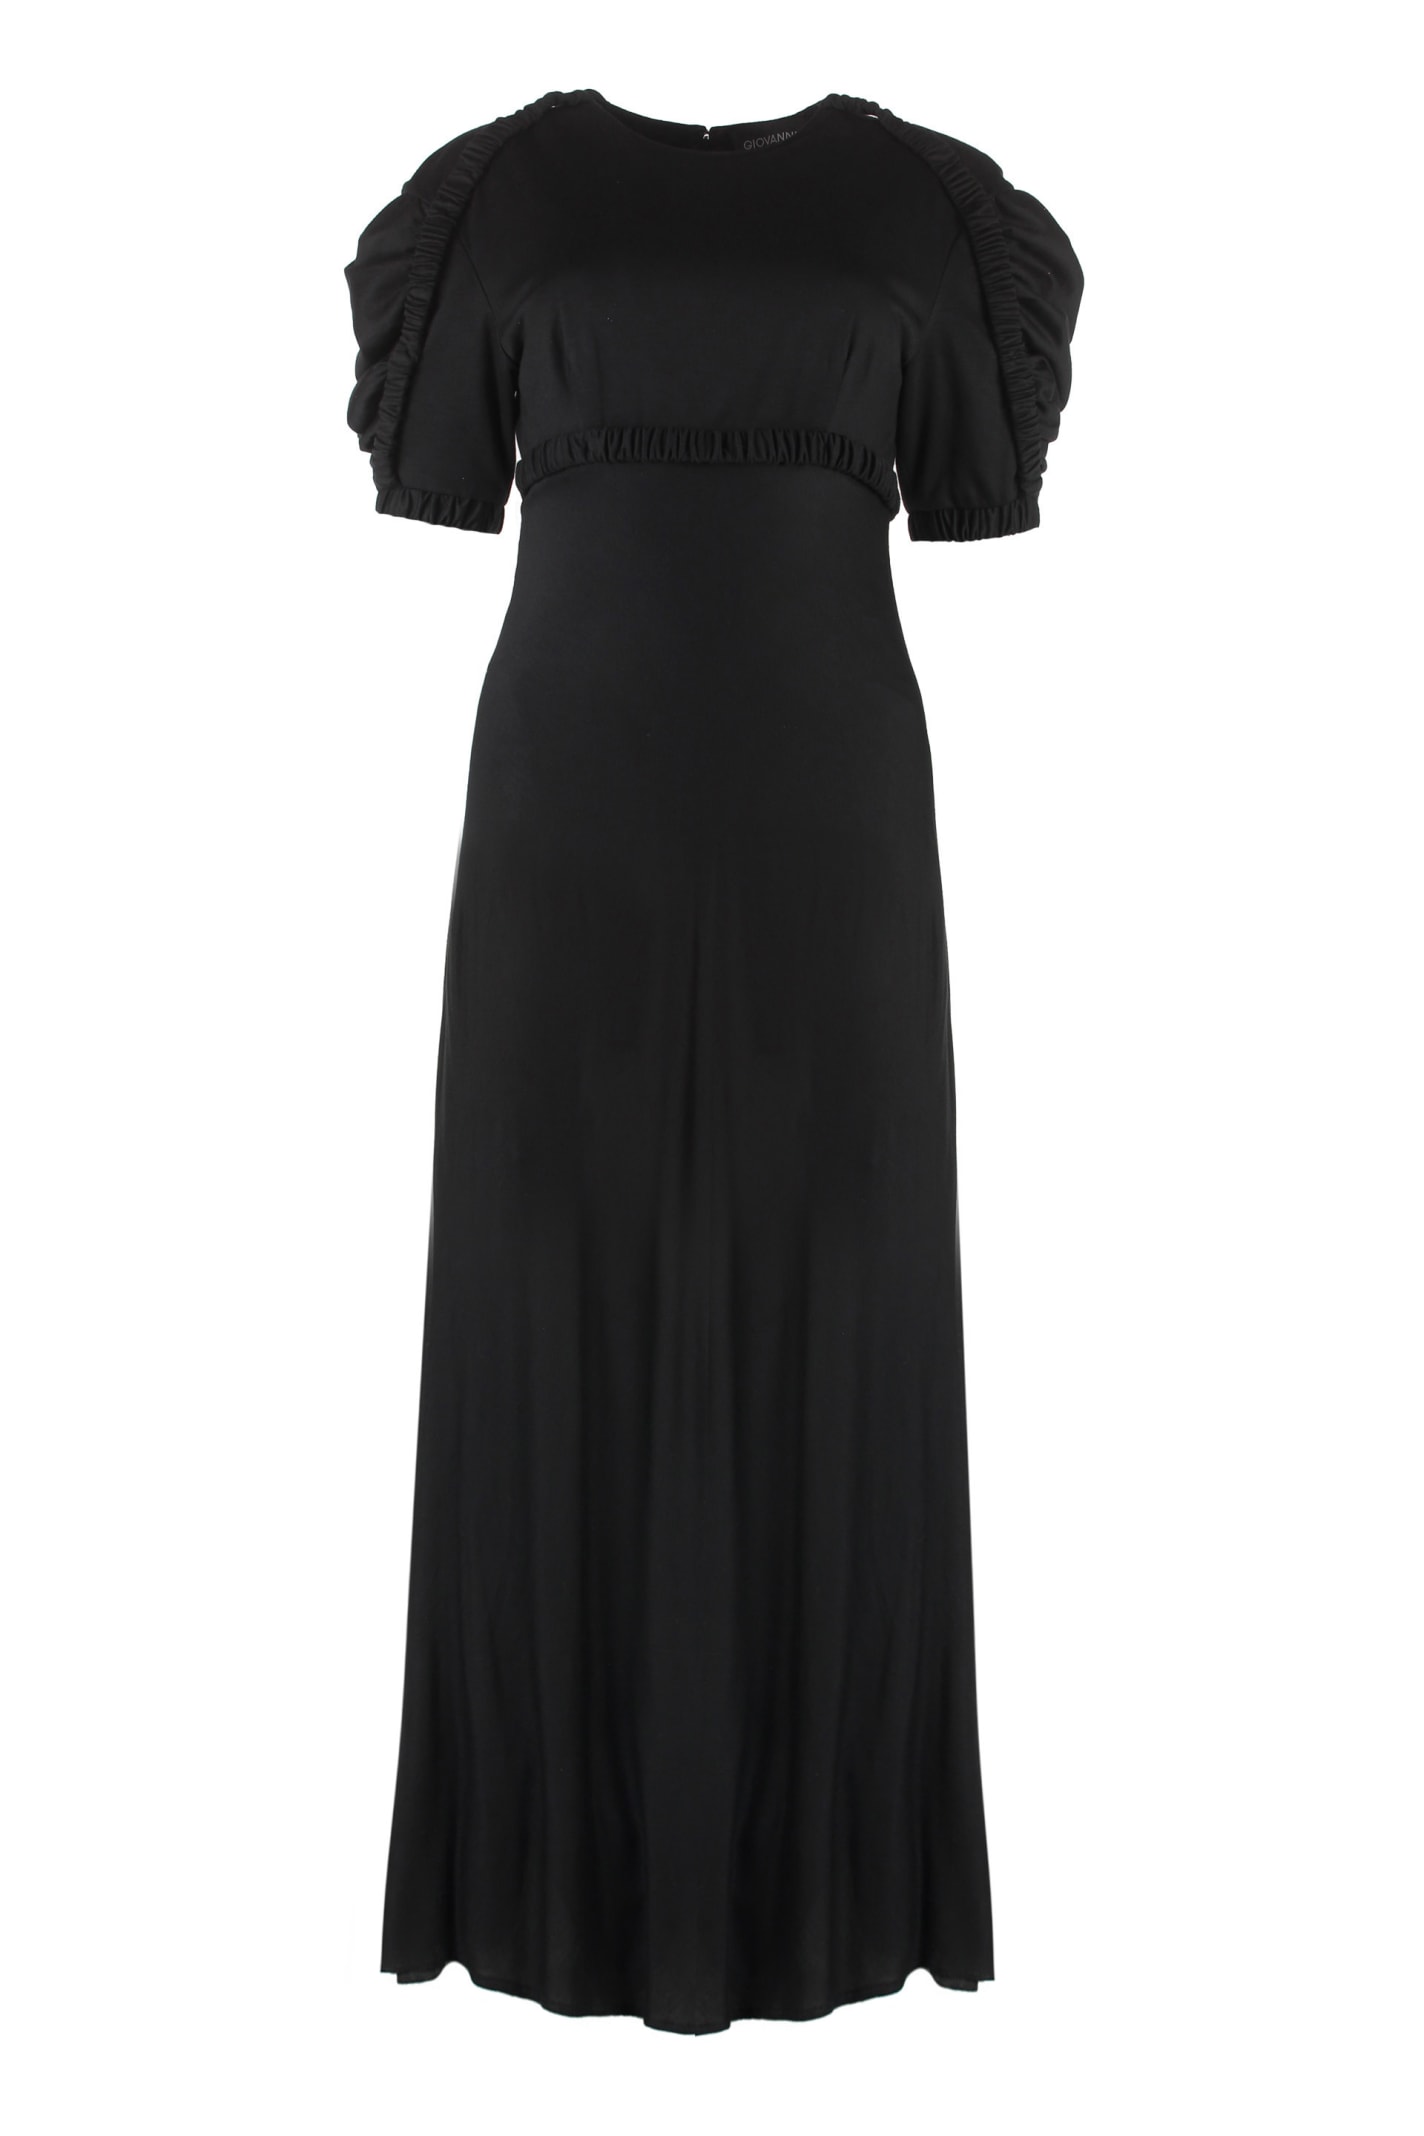 Giovanni Bedin Knitted Long Dress